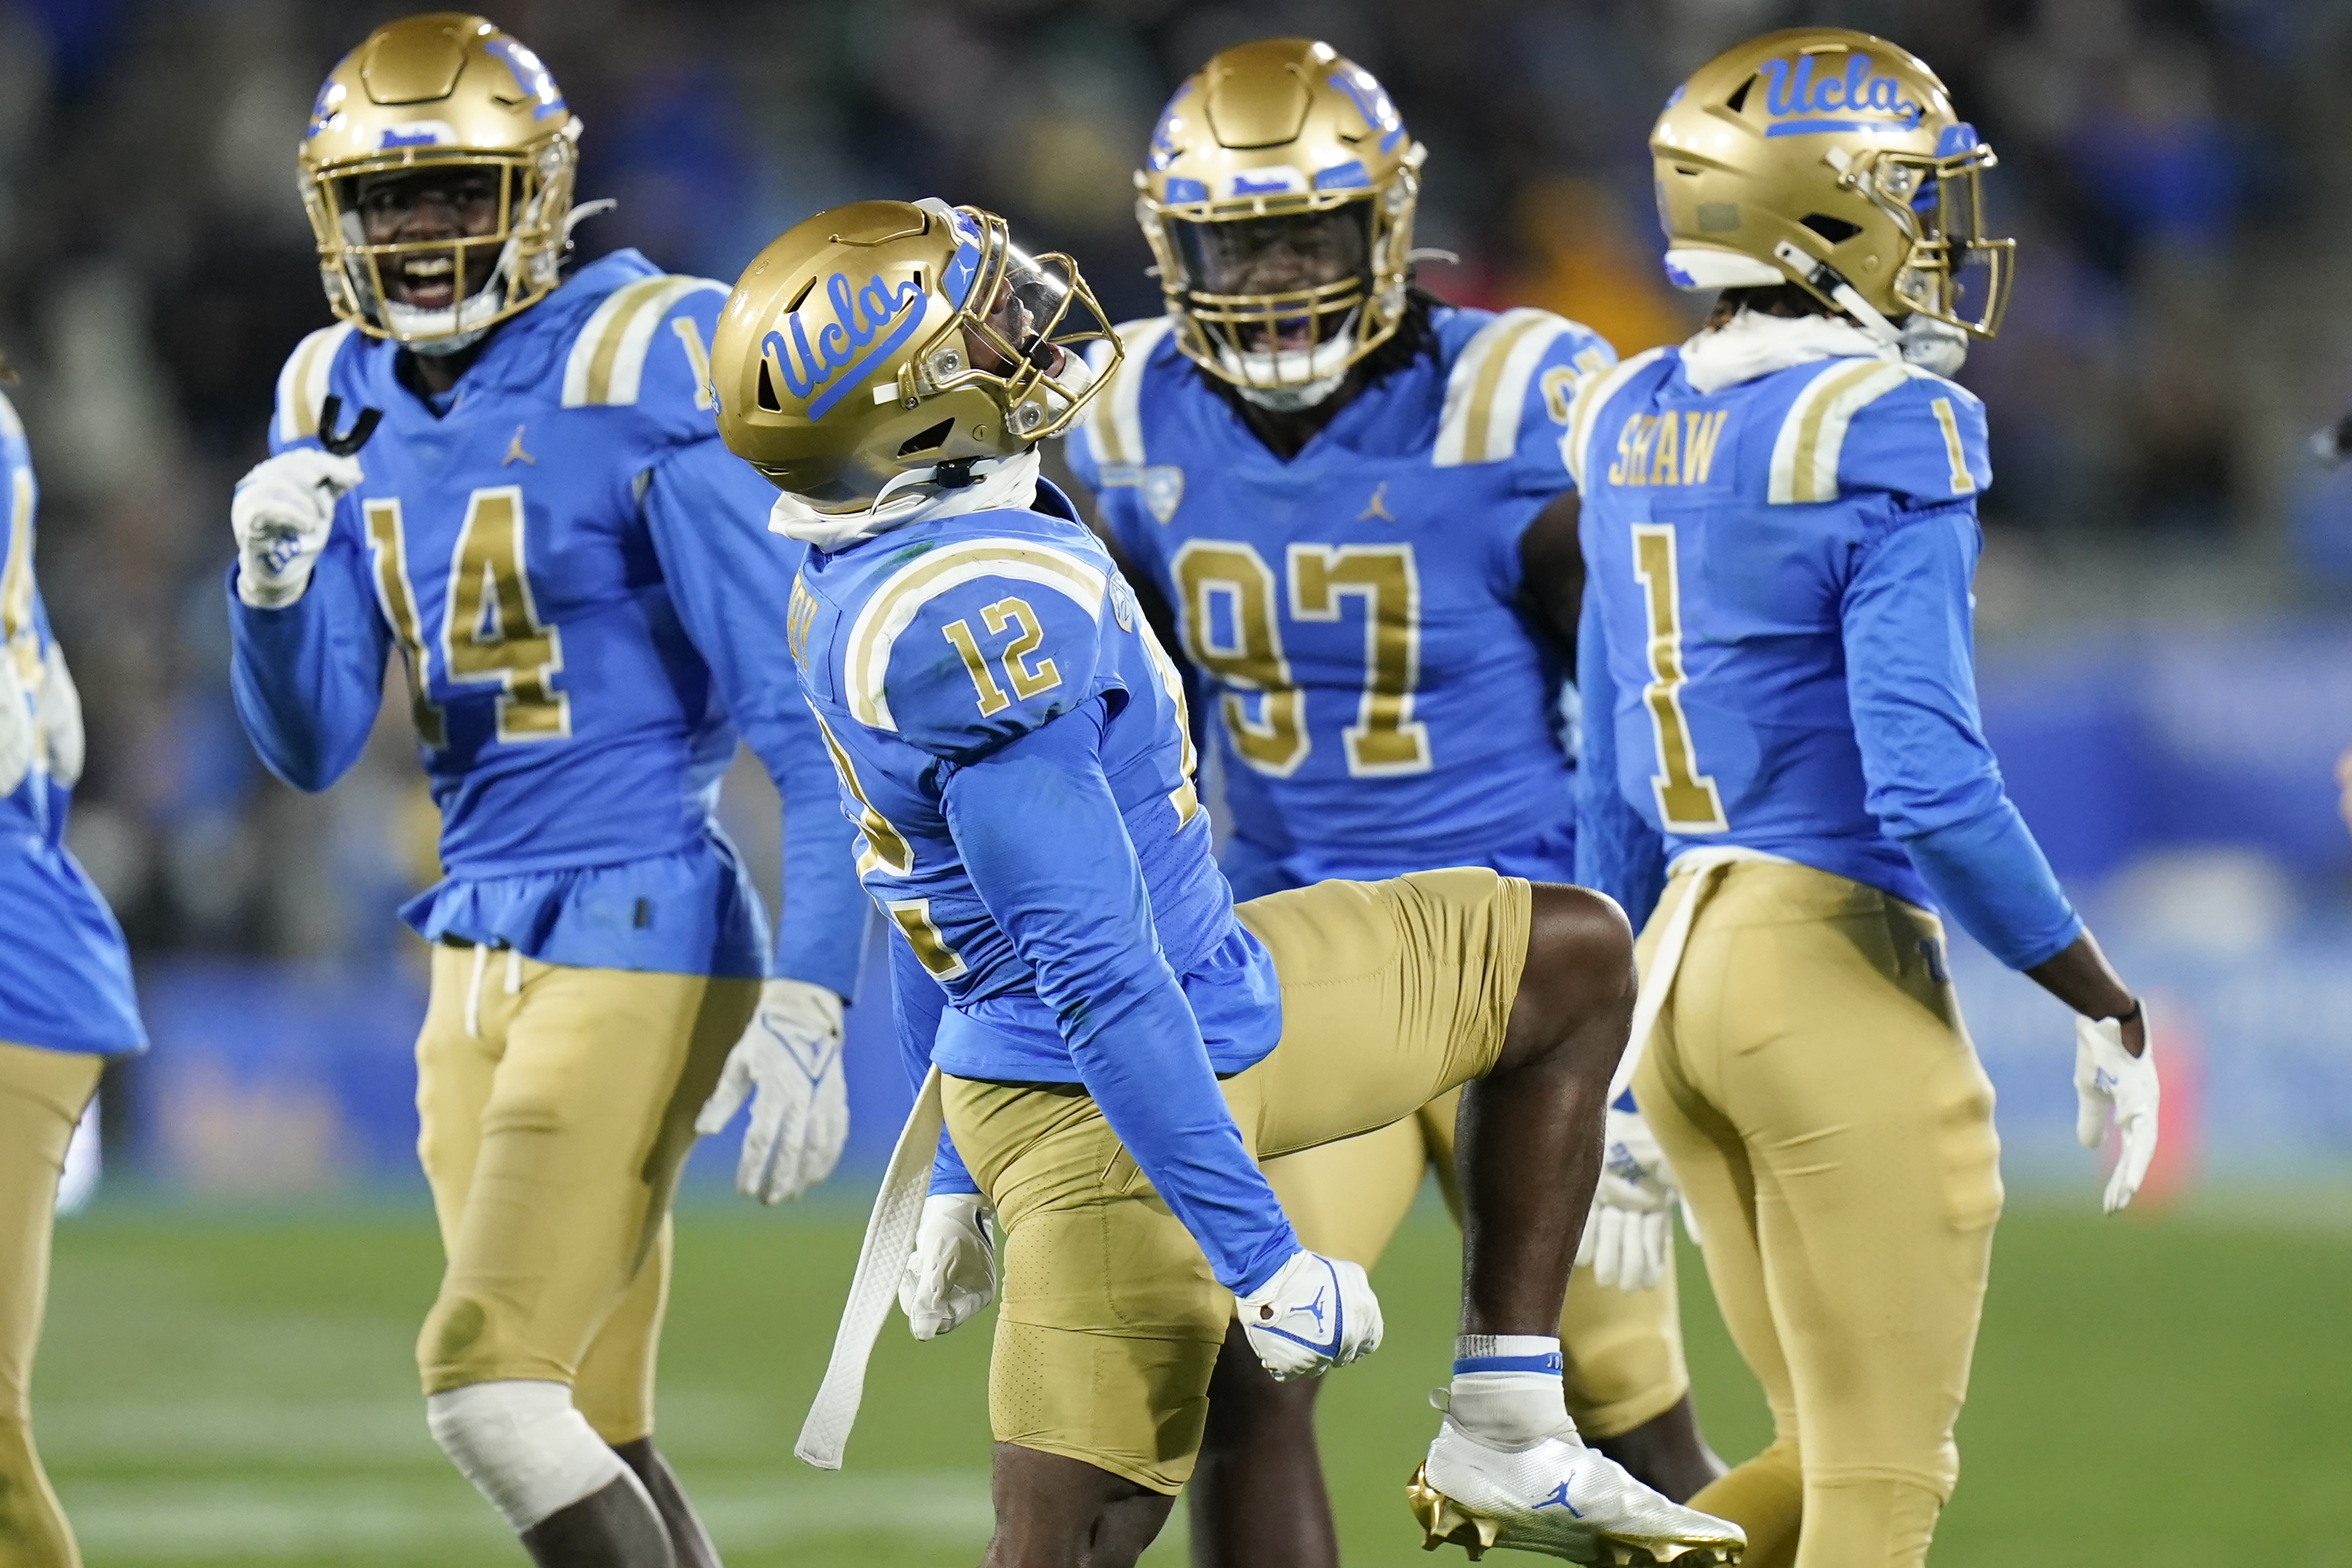 UCLA vs. NC State Holiday Bowl Canceled Due to Bruins' COVID-19 Issues